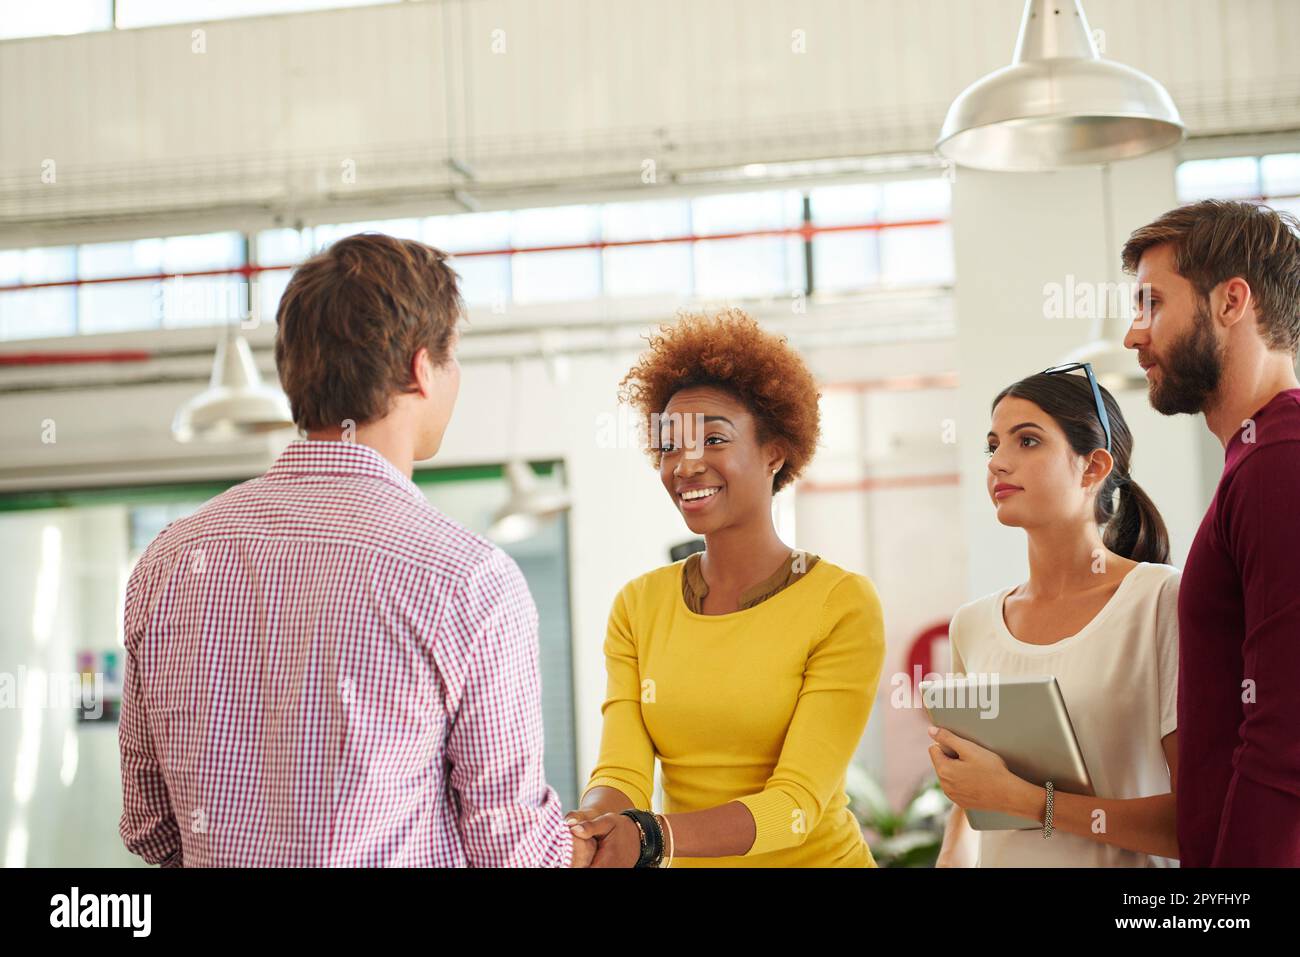 I cant wait to see what you can do. two people shaking hands in an office while their coworkers look on. Stock Photo